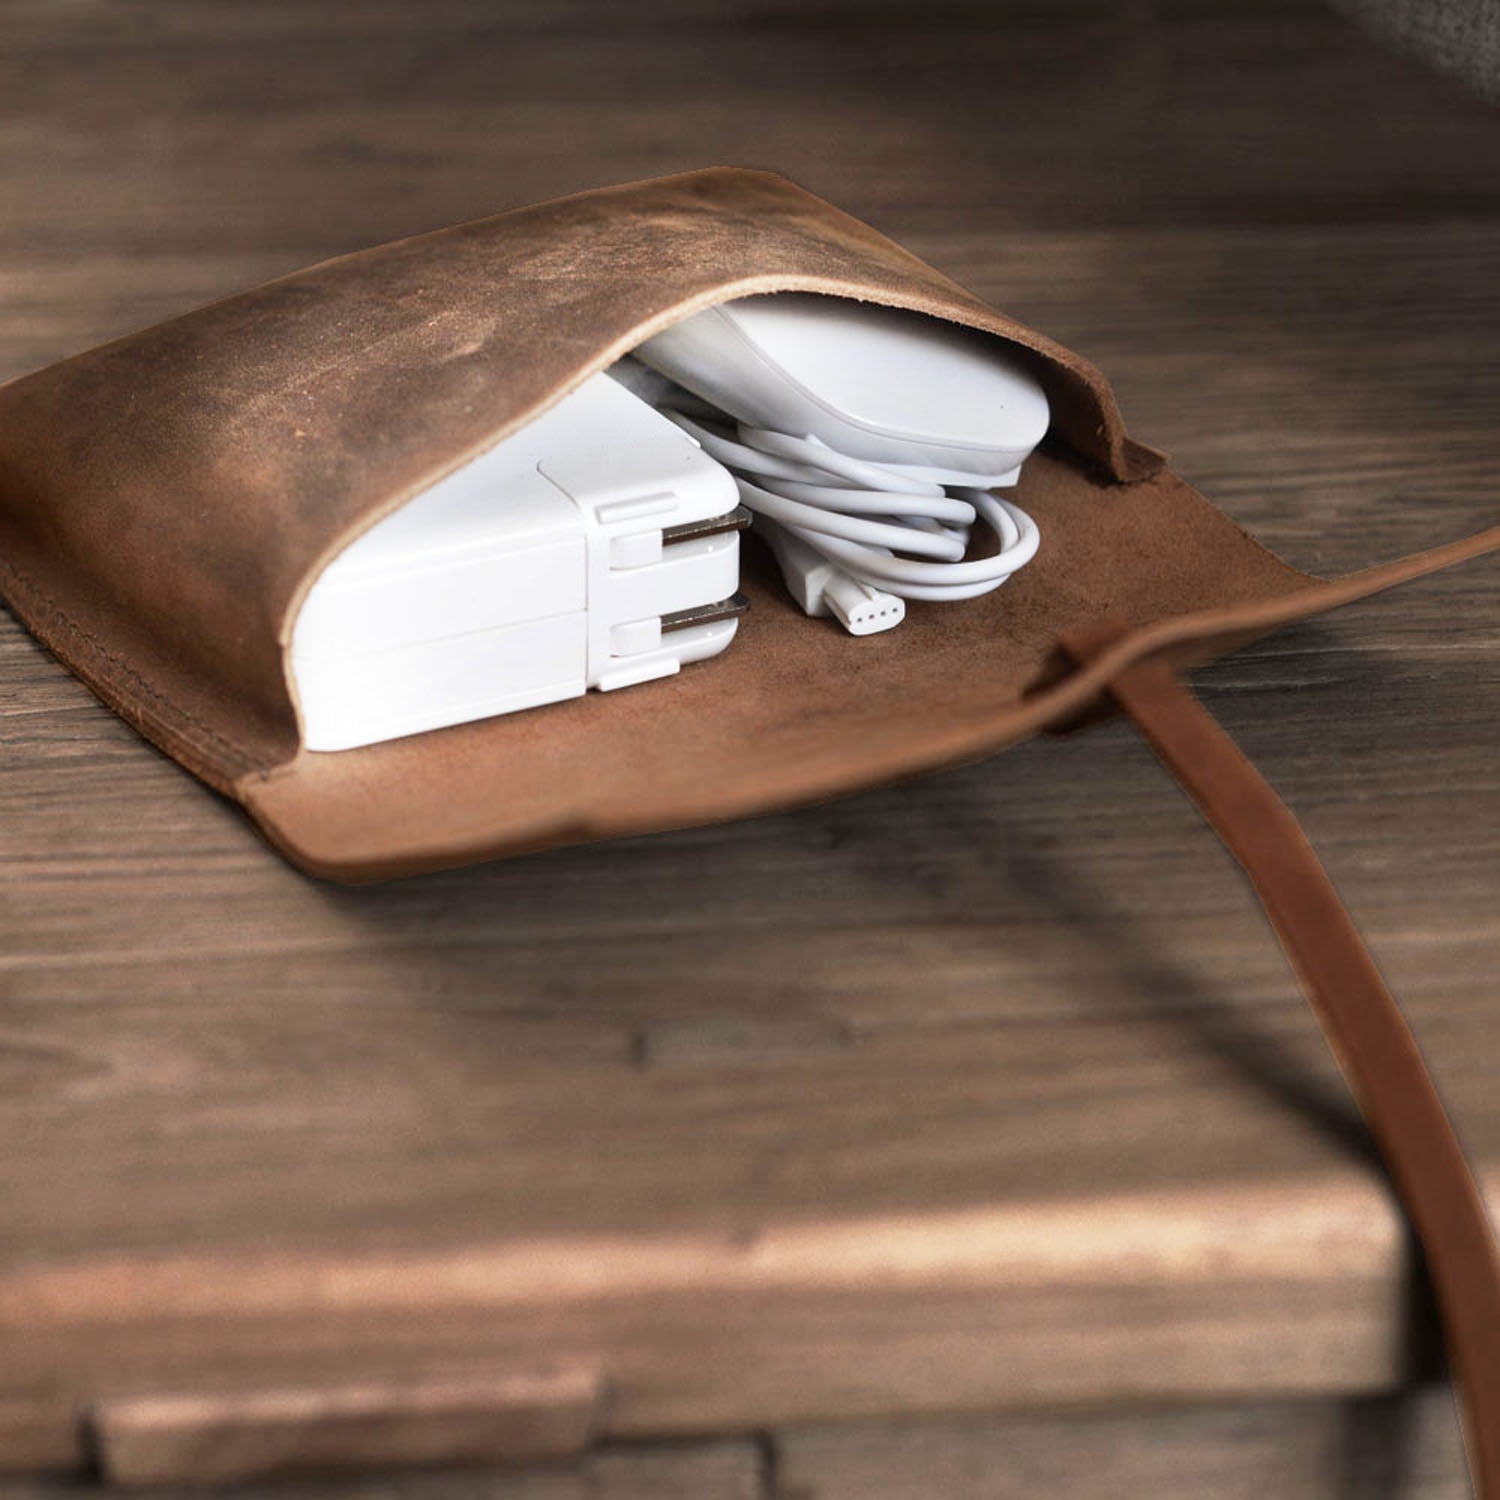 Leather Cable and Charger Organizer Bag Handmade Cord 